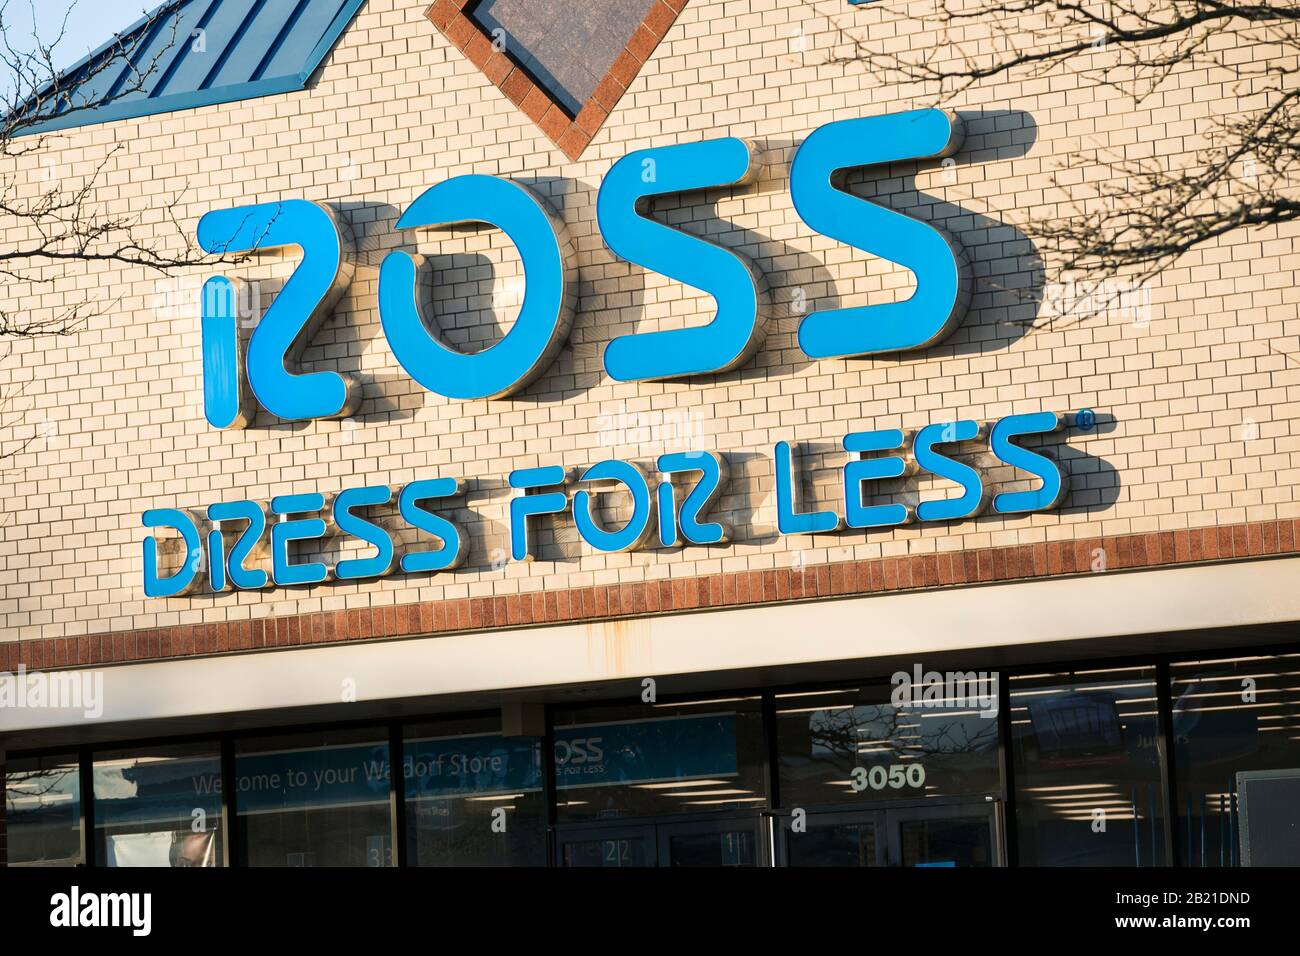 Ross store hires stock photography and images Alamy